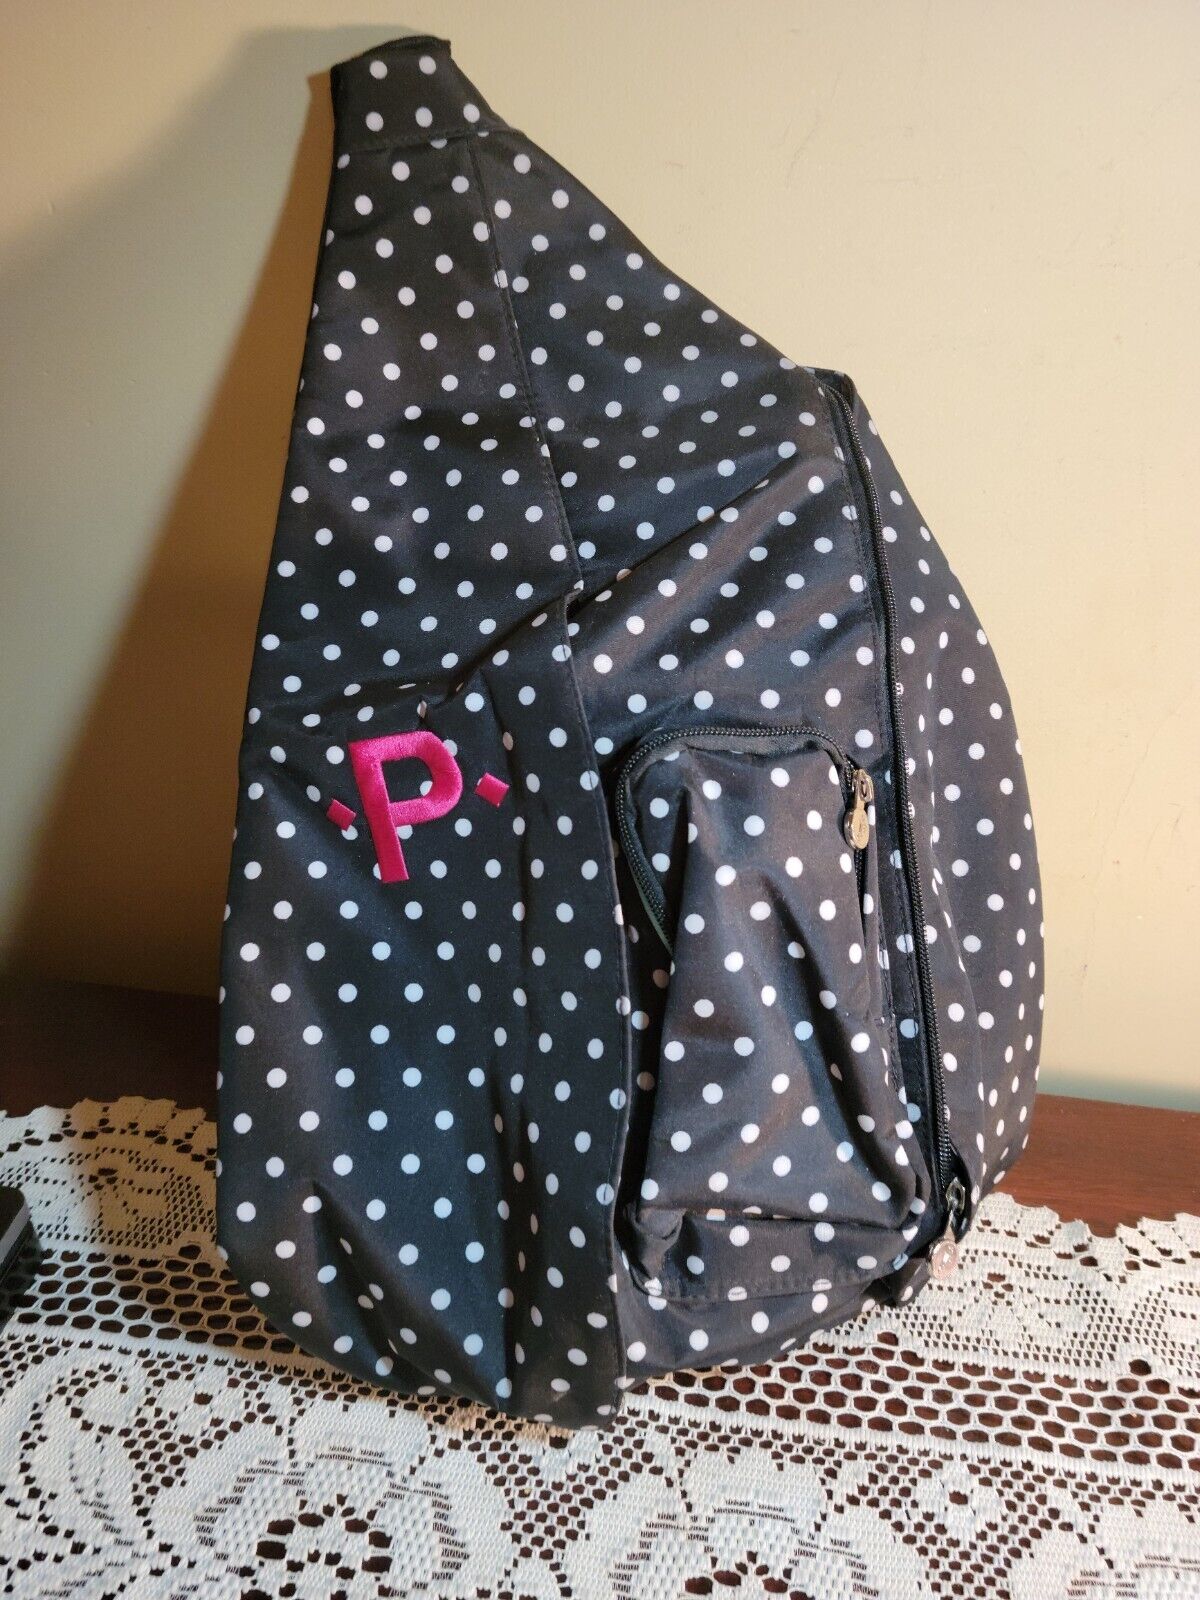 Initials Inc. Sling Backpack Black White Pin Dot Teal Turquoise Interior "P"